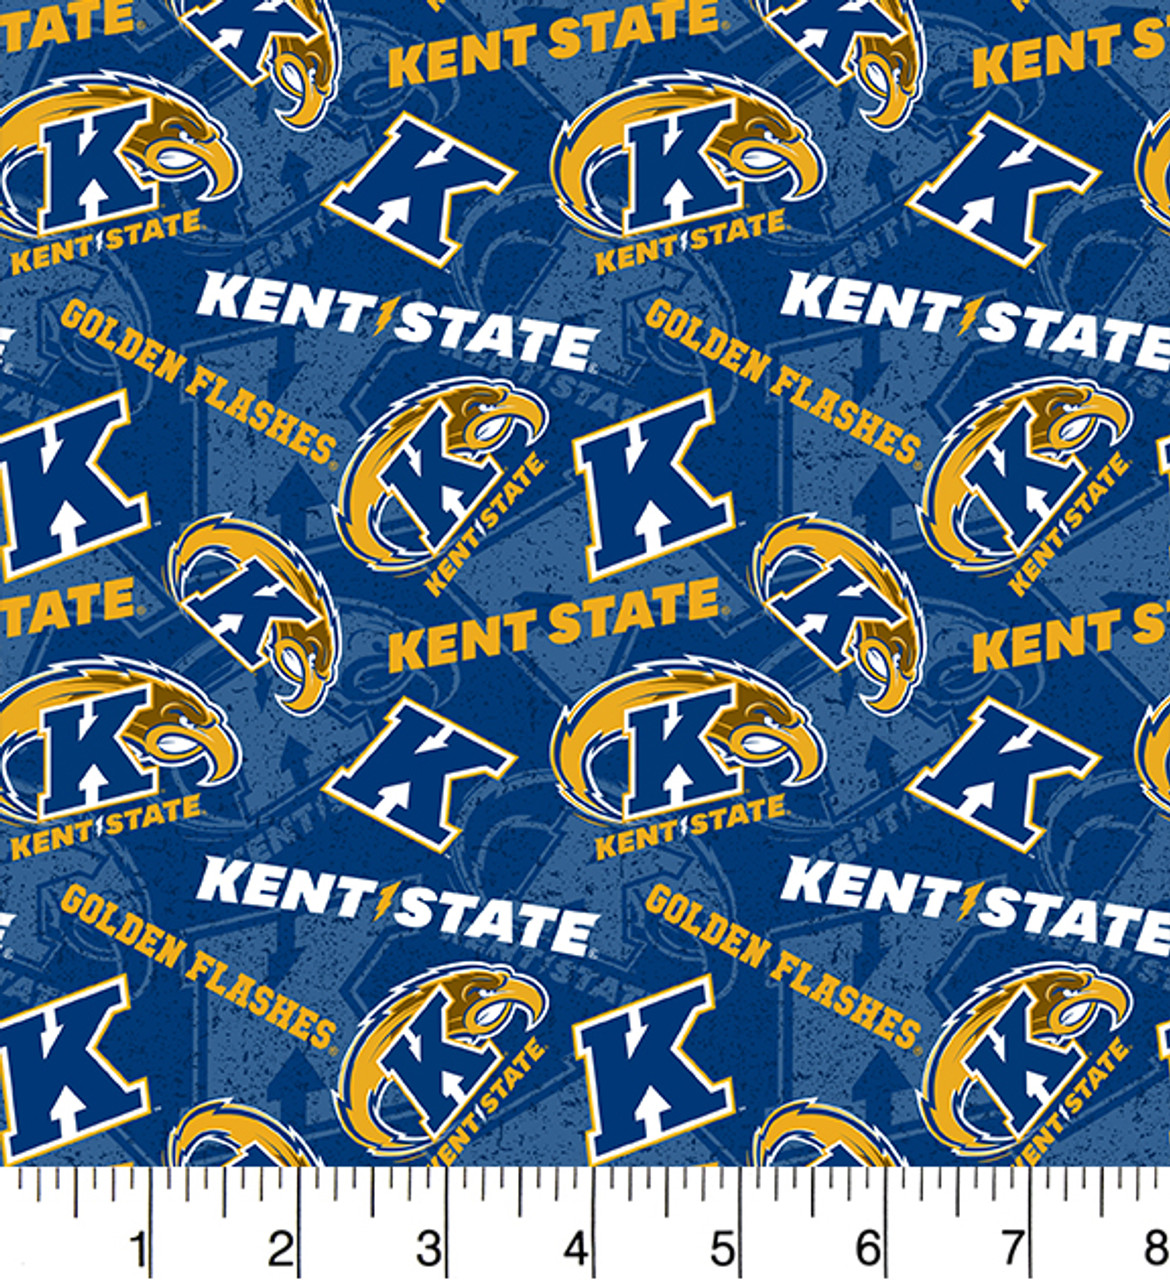 Kent State University Golden Flashes Cotton Fabric with Tone On Tone Print and Matching Solid Cotton Fabrics